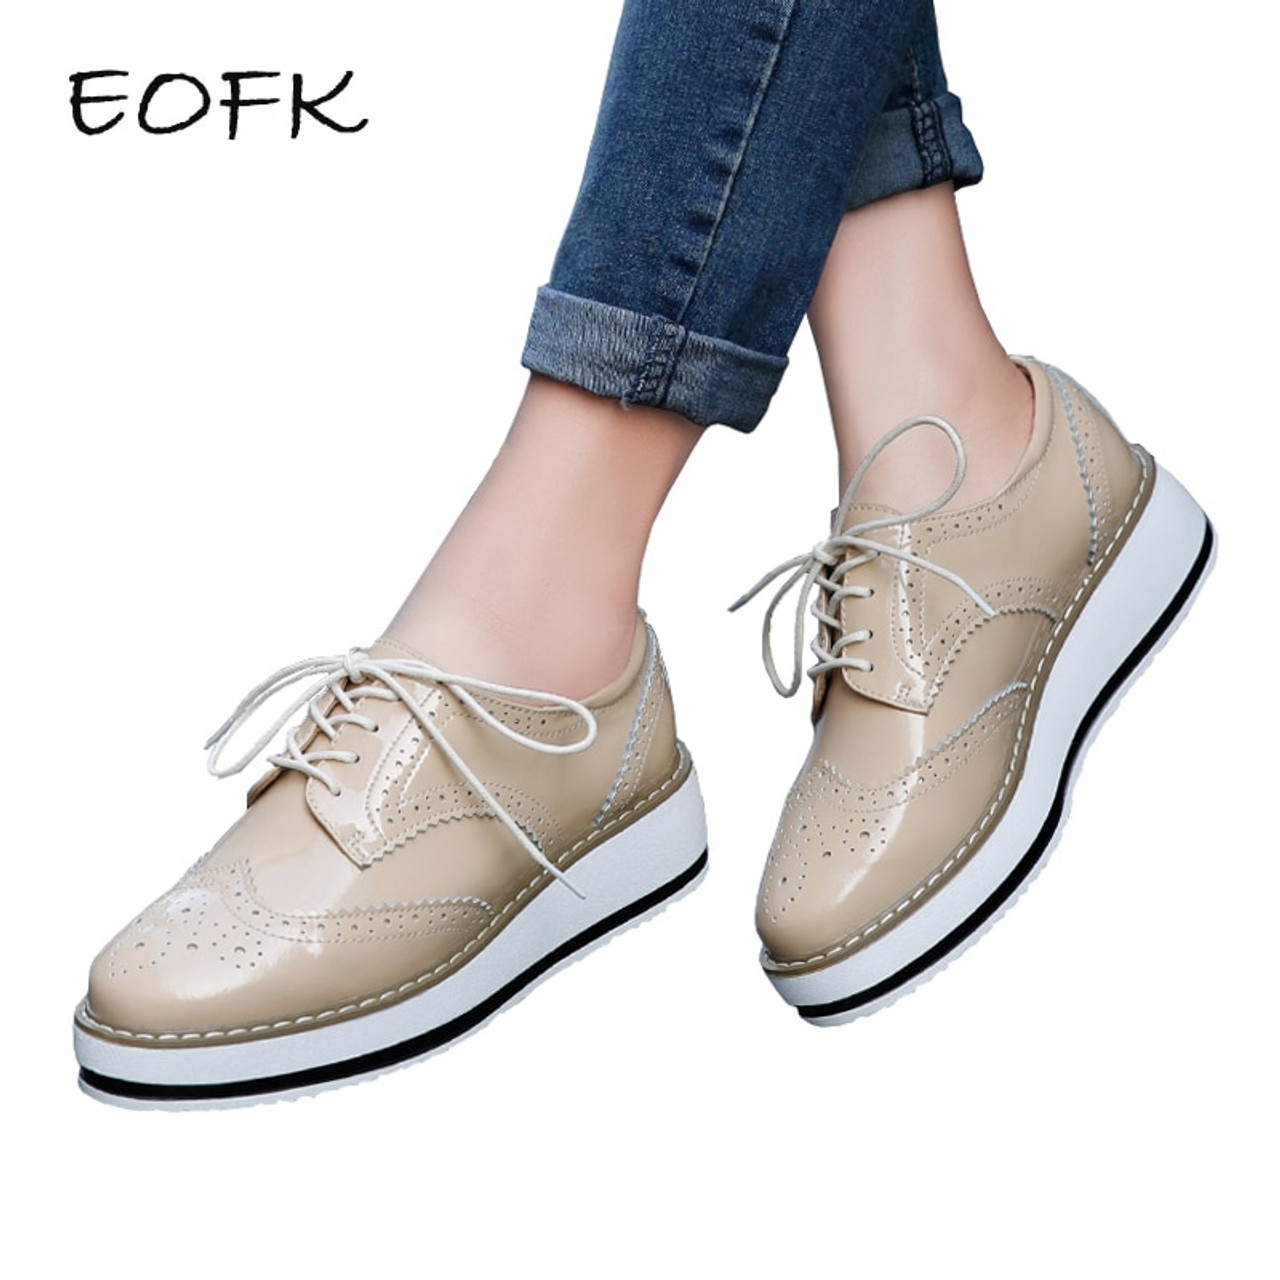 flat lace up shoes womens